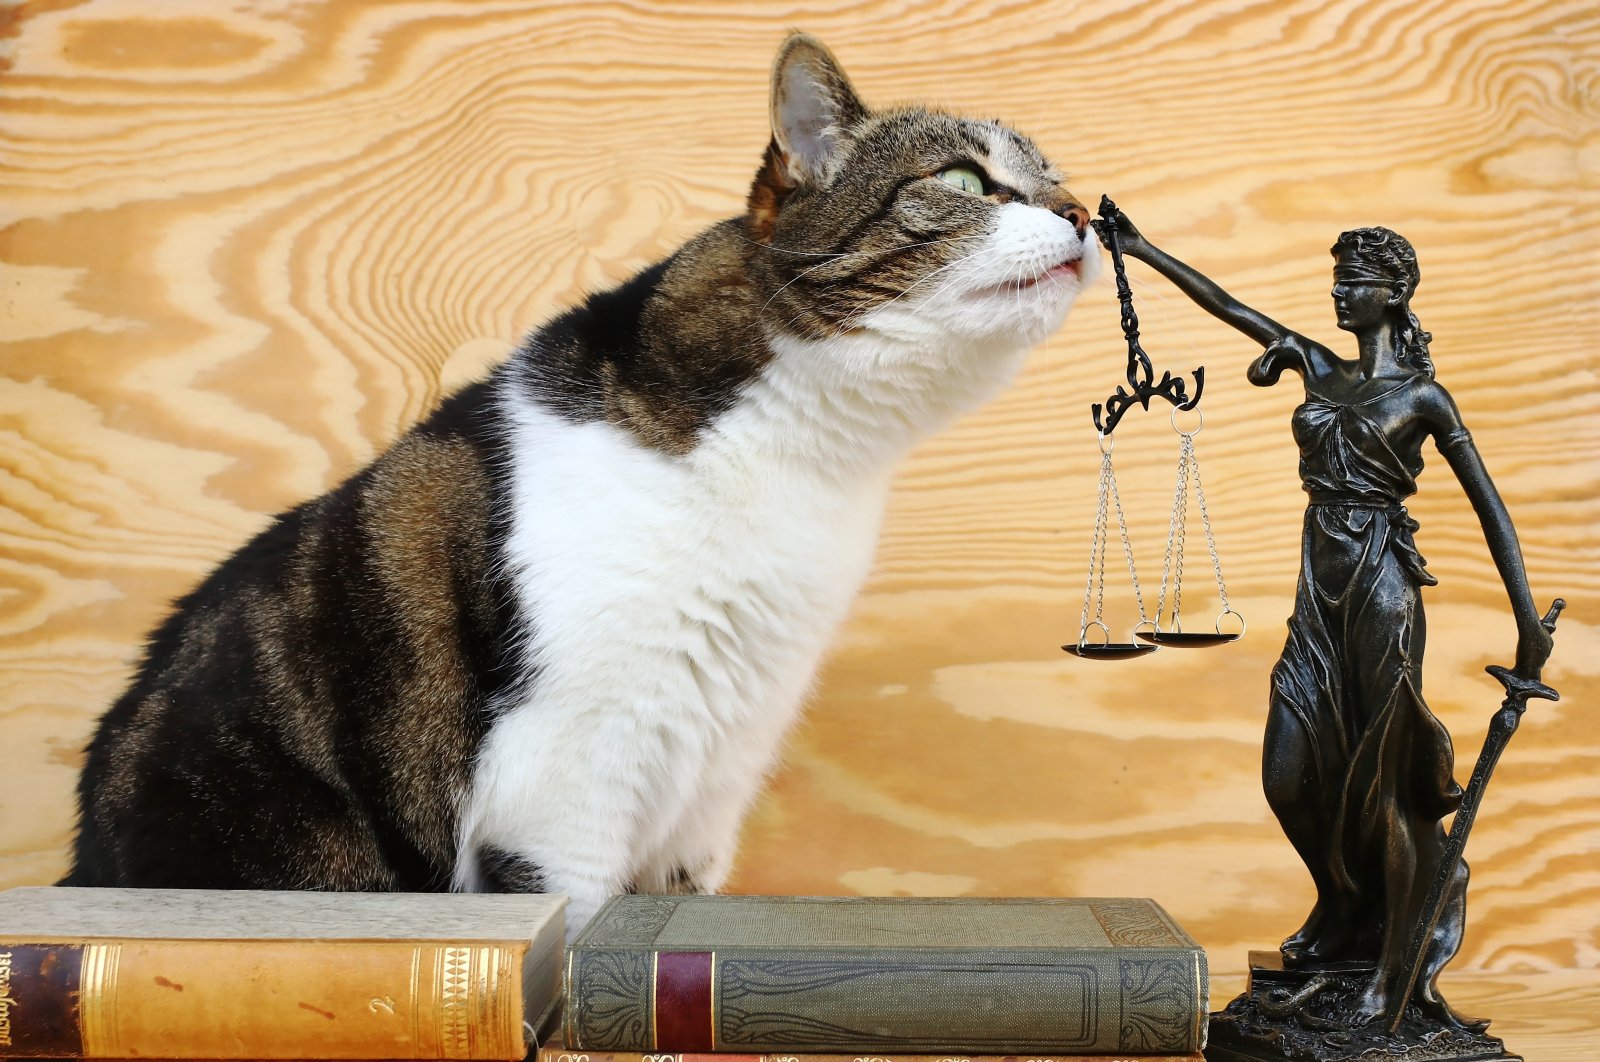 "If the penalty imposed is the highest ever under Türkiye’s Animal Protection Law to date, the latest incidents show us that the current legislation is inadequate. This law leads to unjust judgments. Therefore, it must be changed." (Shutterstock Photo)